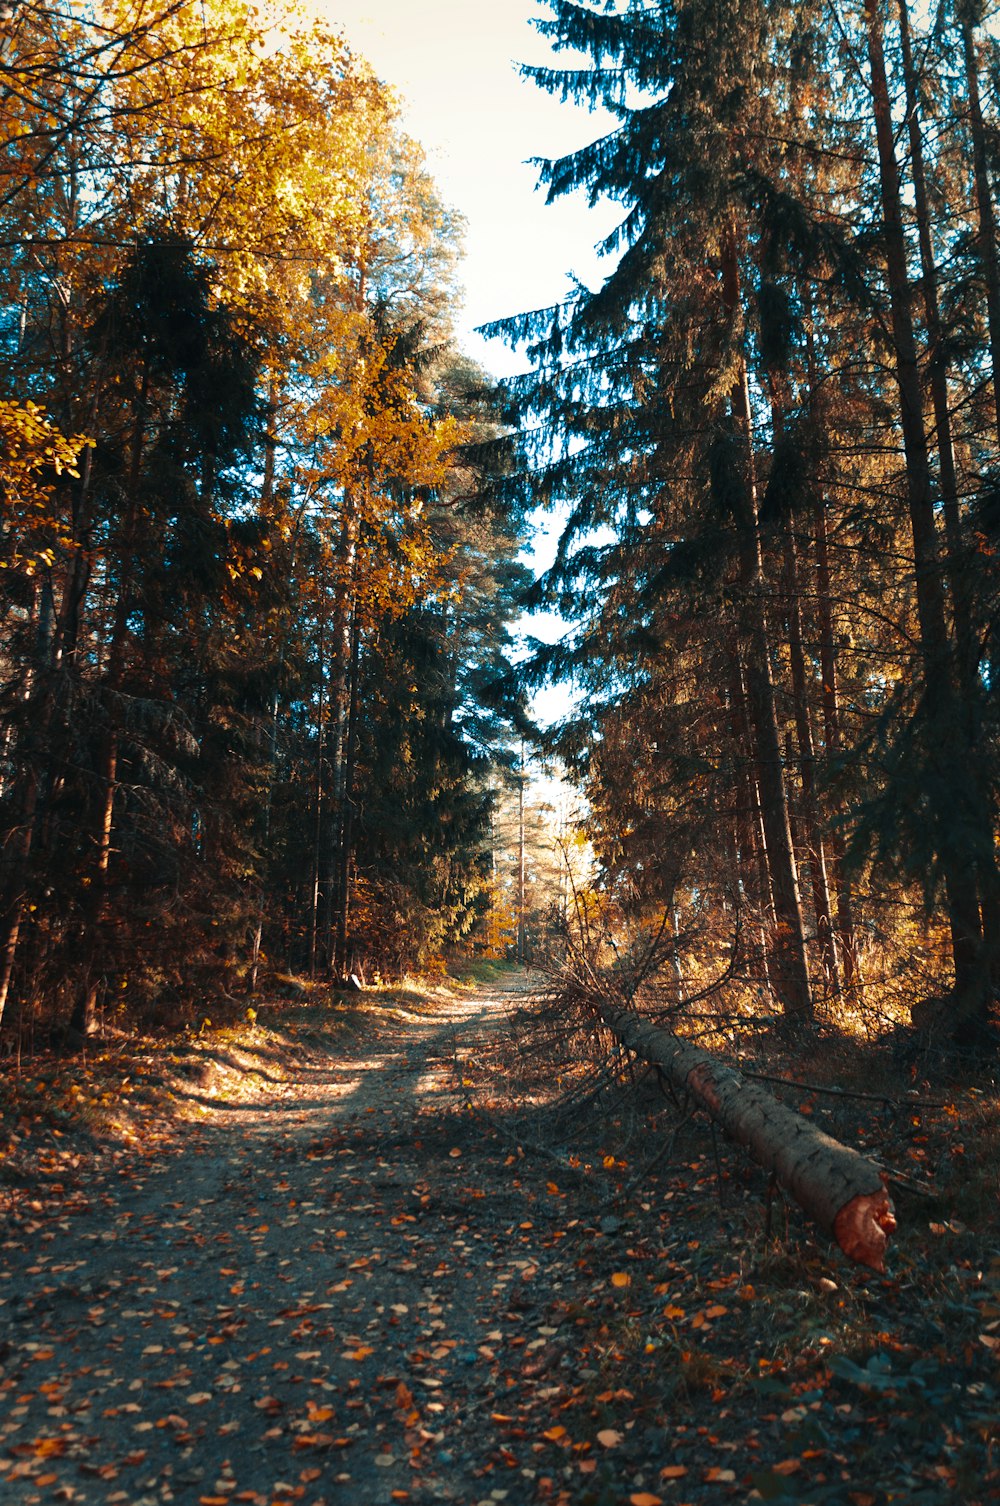 a dirt road surrounded by trees and fallen leaves